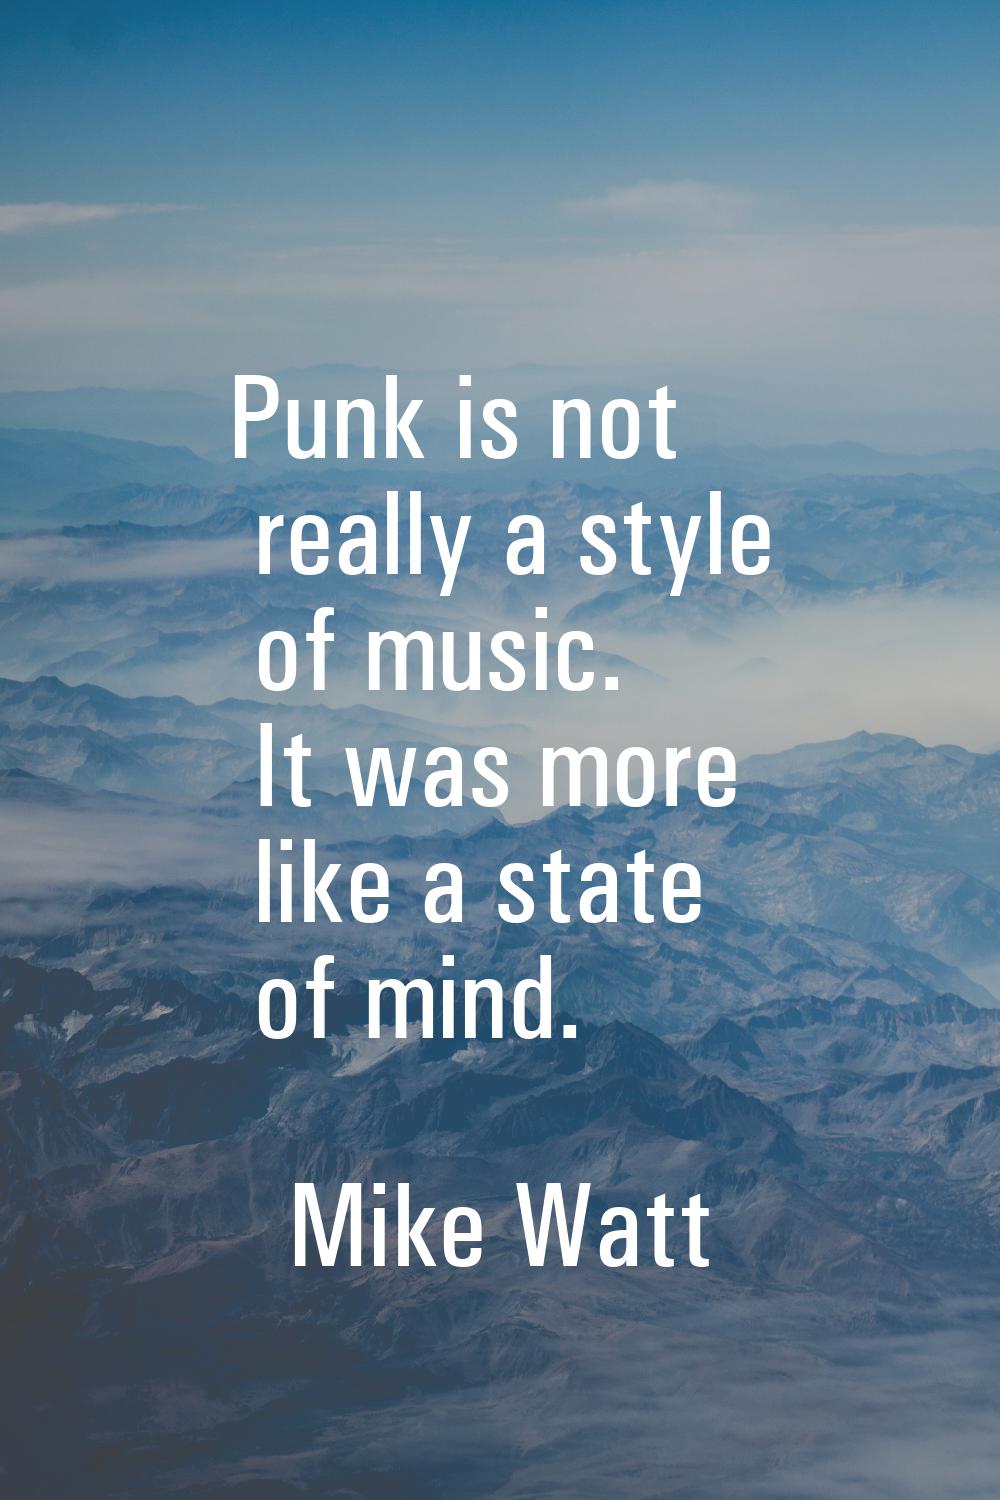 Punk is not really a style of music. It was more like a state of mind.